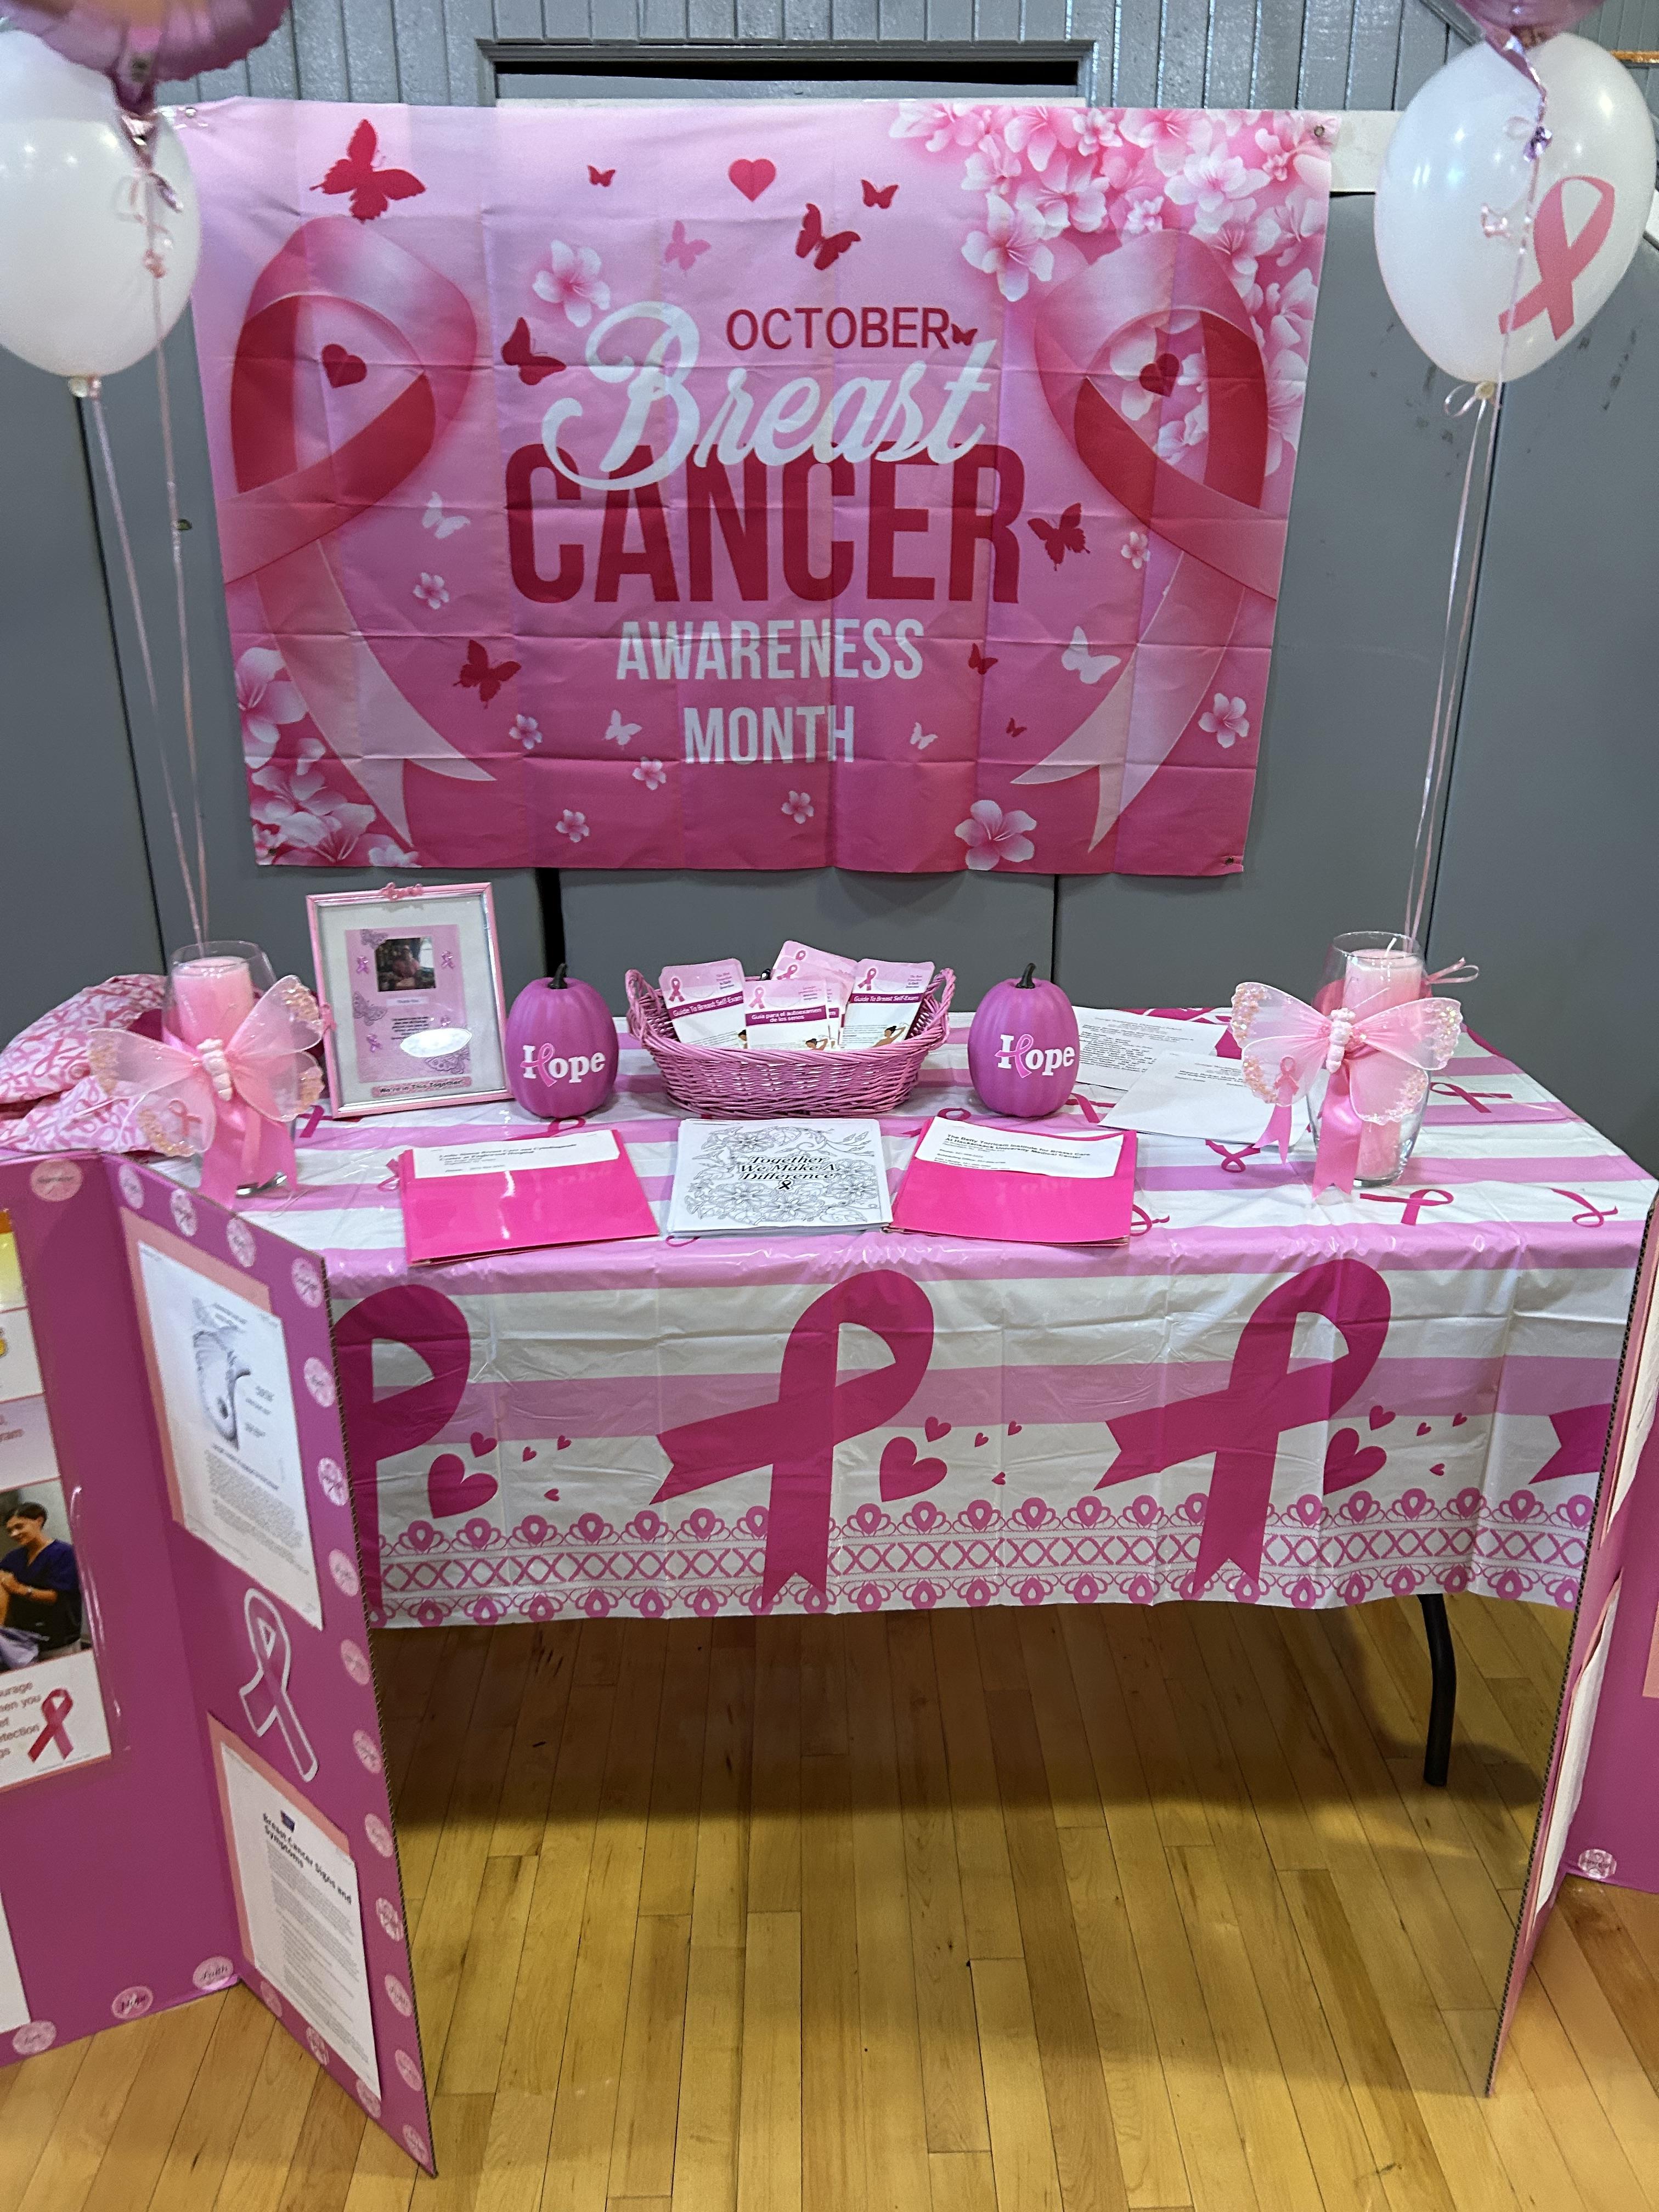 Breast Cancer Awareness Month at the Washington School